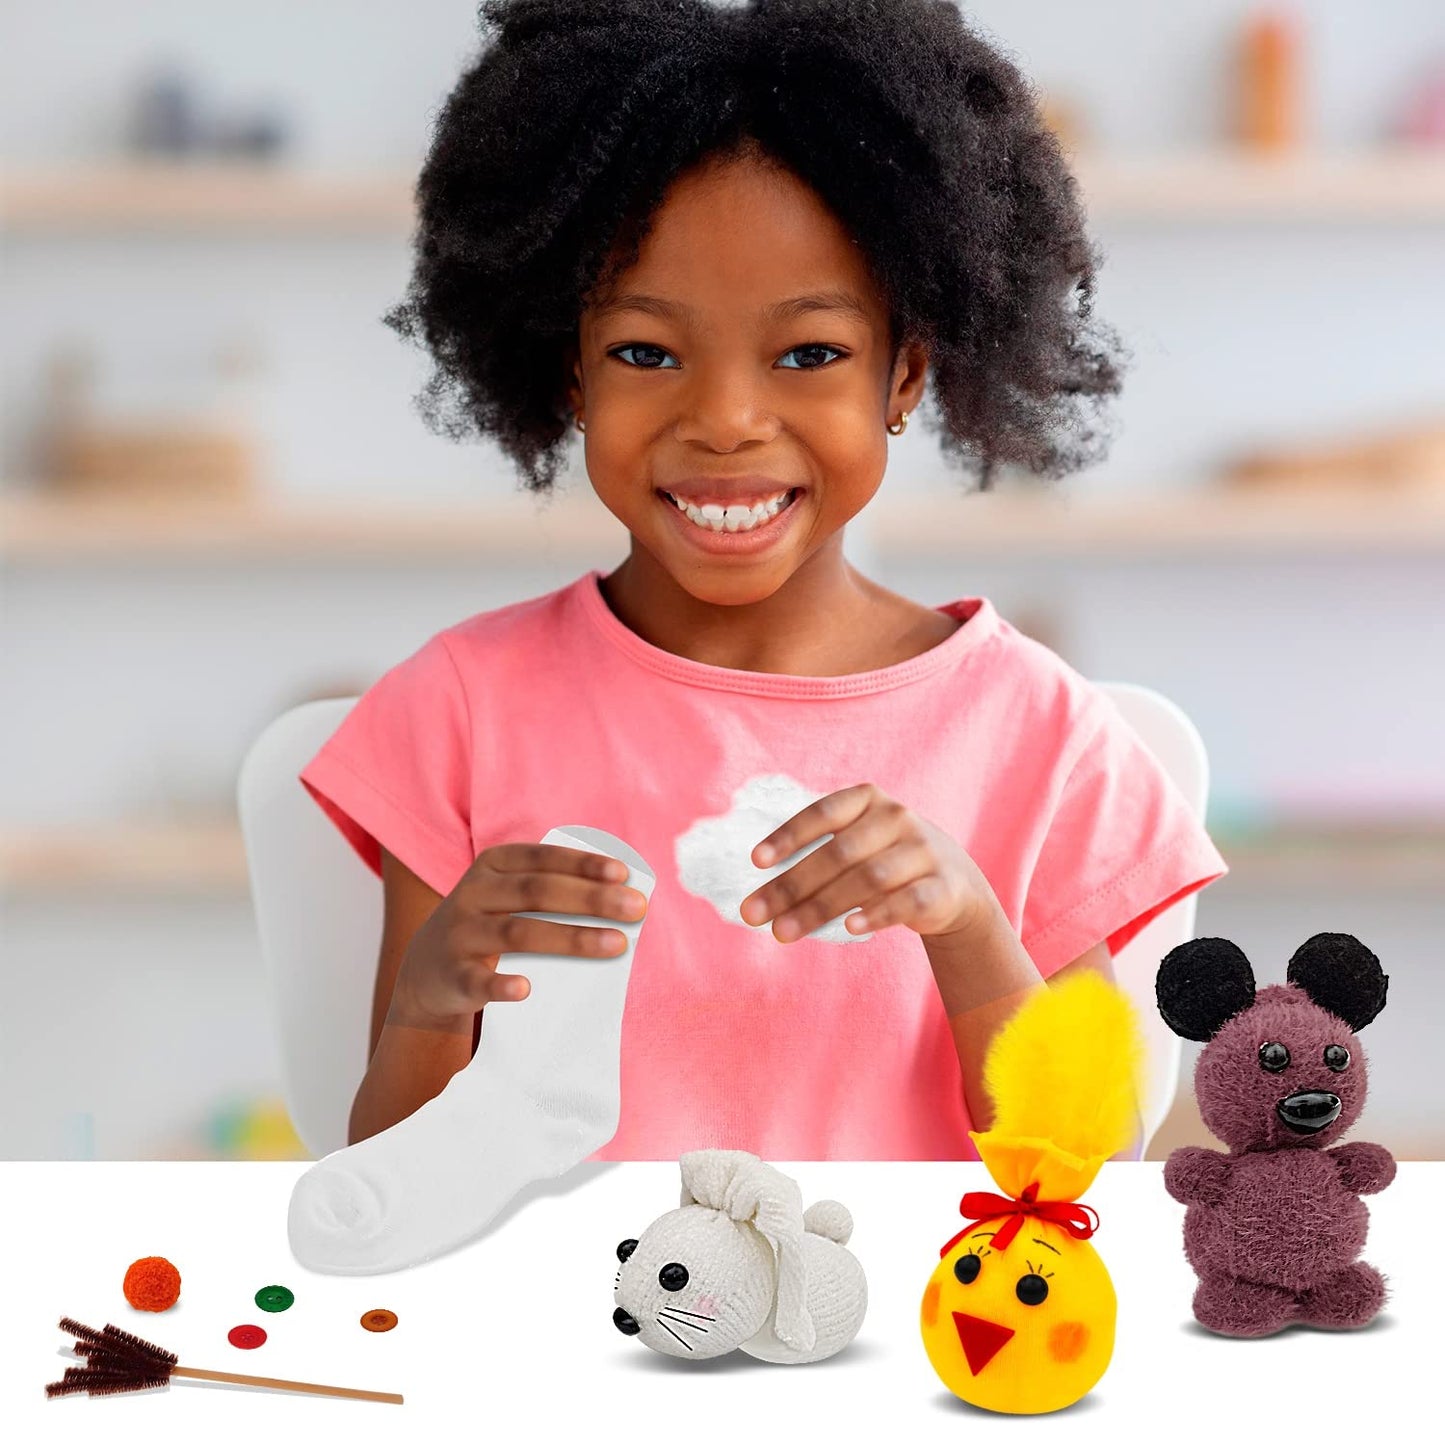 Arts and Crafts for Kids Ages 8-12, Create Your Own Plush Toys, Kit Includes All Supplies and Instructions, Best Craft Project for Girls & Boys Ages 7,8,9,10,11,12, Great Gift!